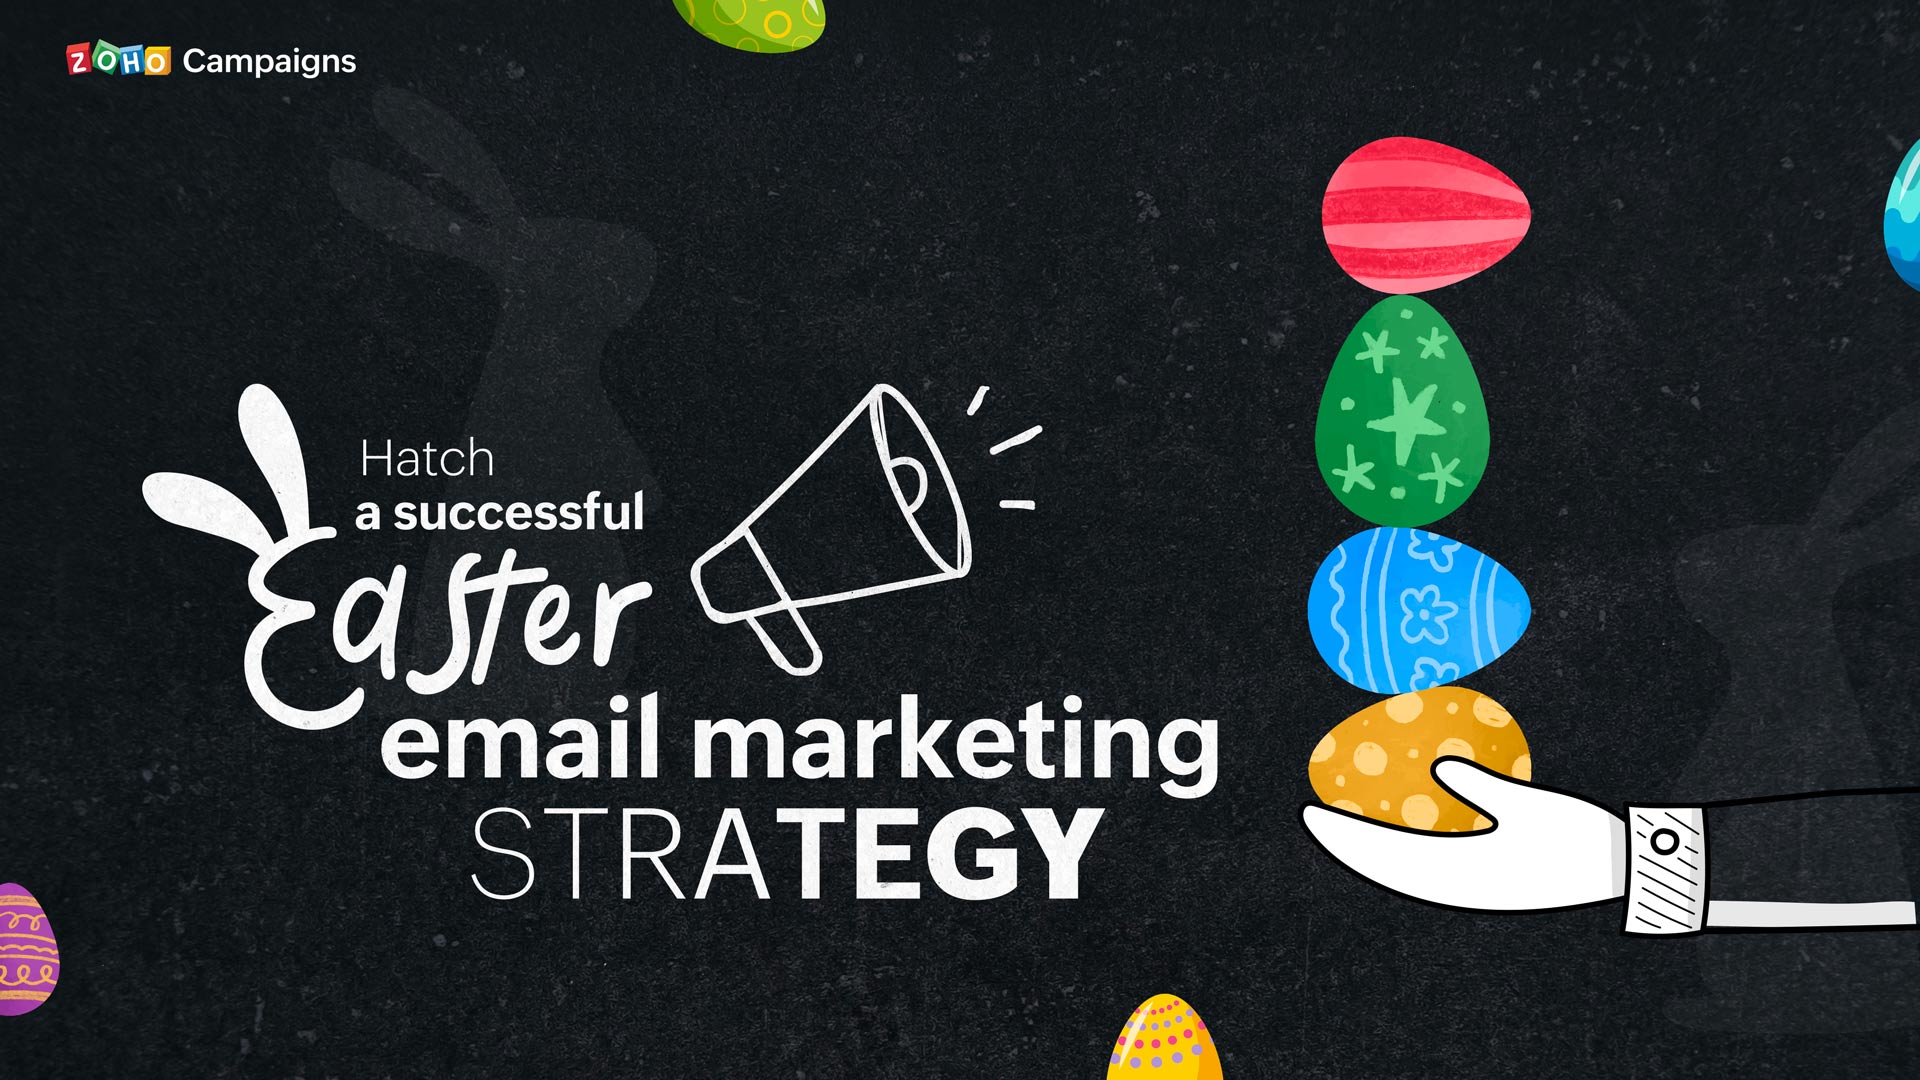 Why hatching a successful Easter email marketing strategy is important for your brand